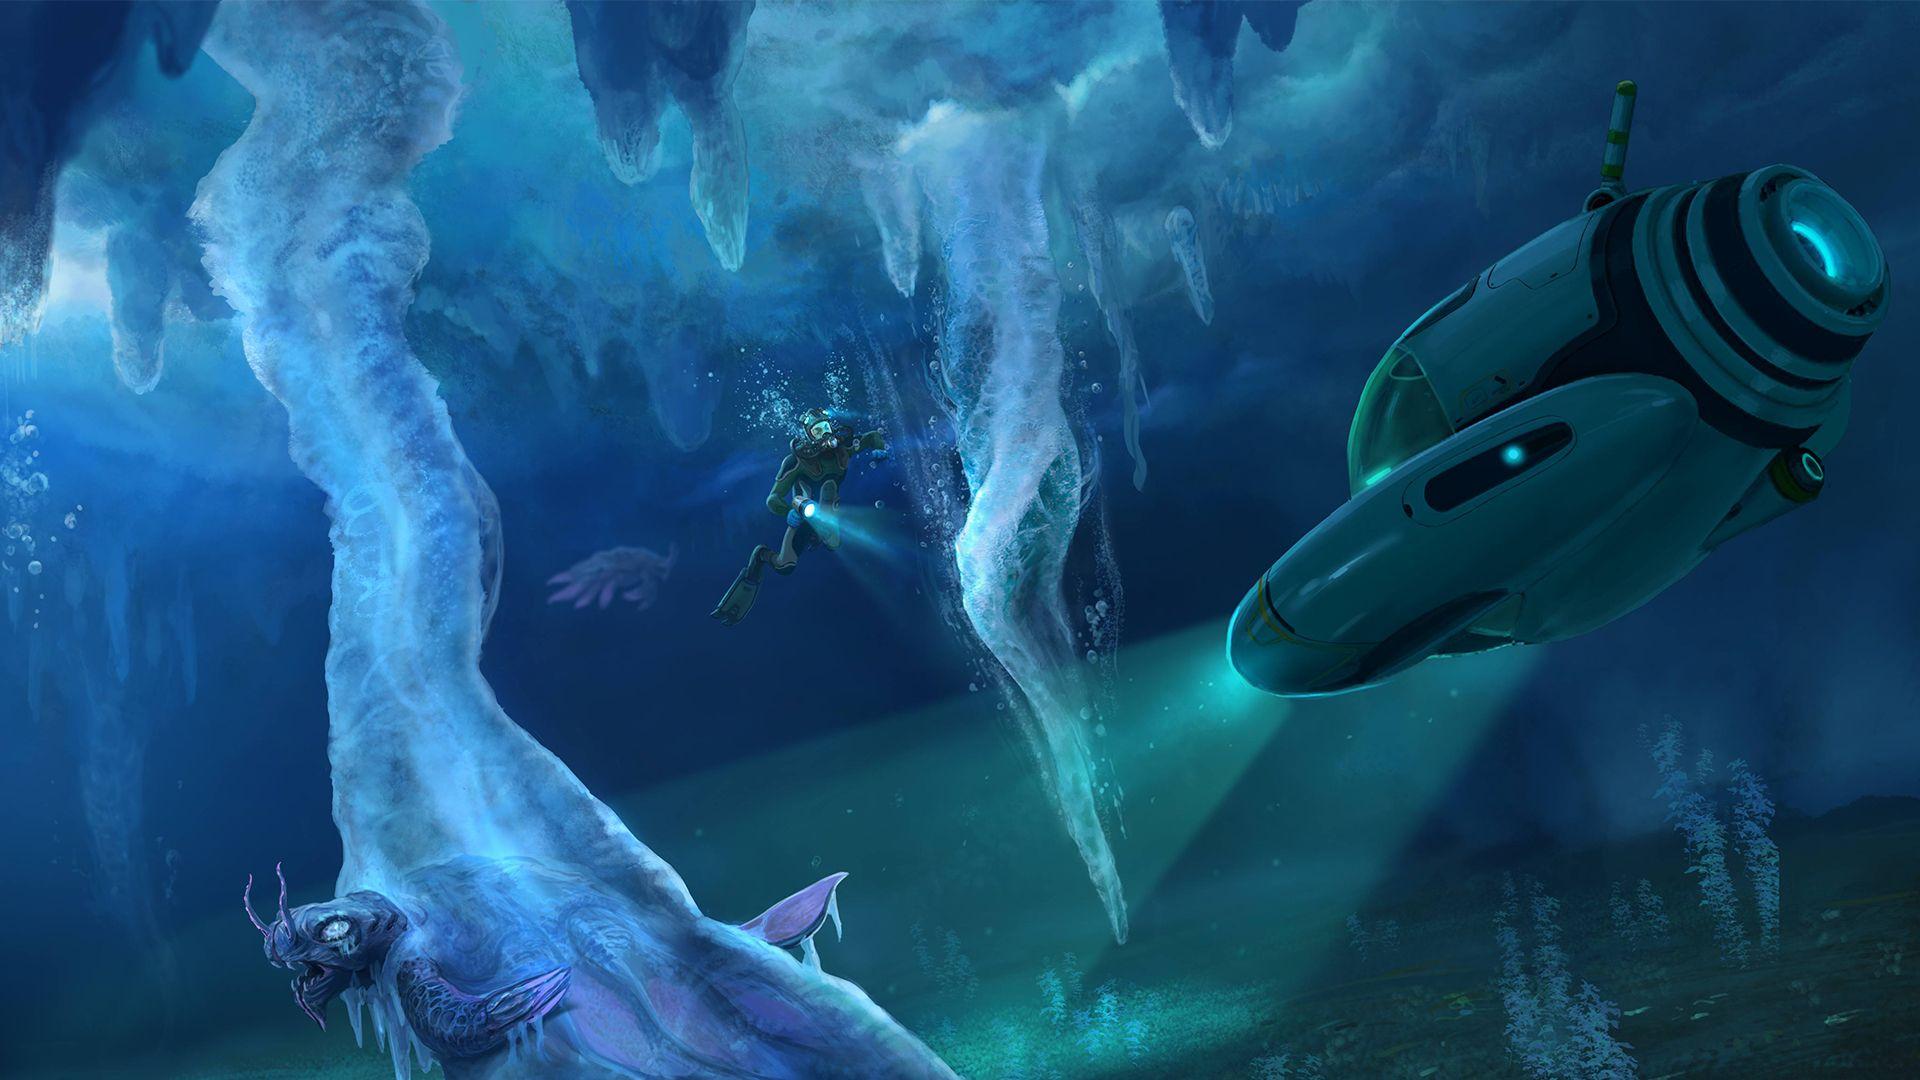 Subnautica goes arctic in Below Zero, a new expansion playable this